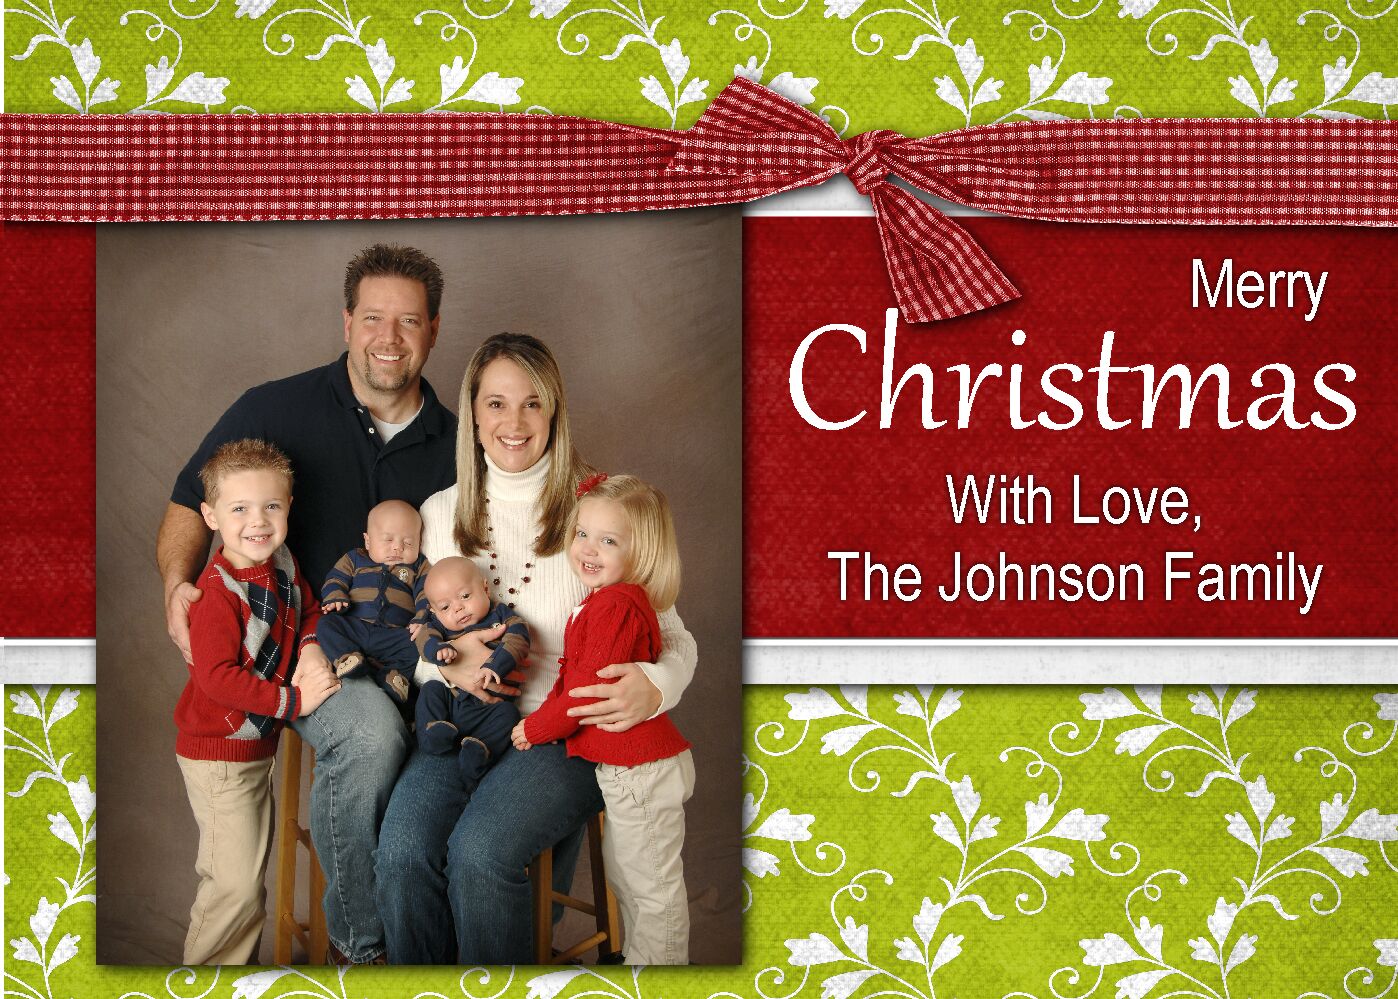 FREE online class! Learn how to make Christmas cards using this kit ...